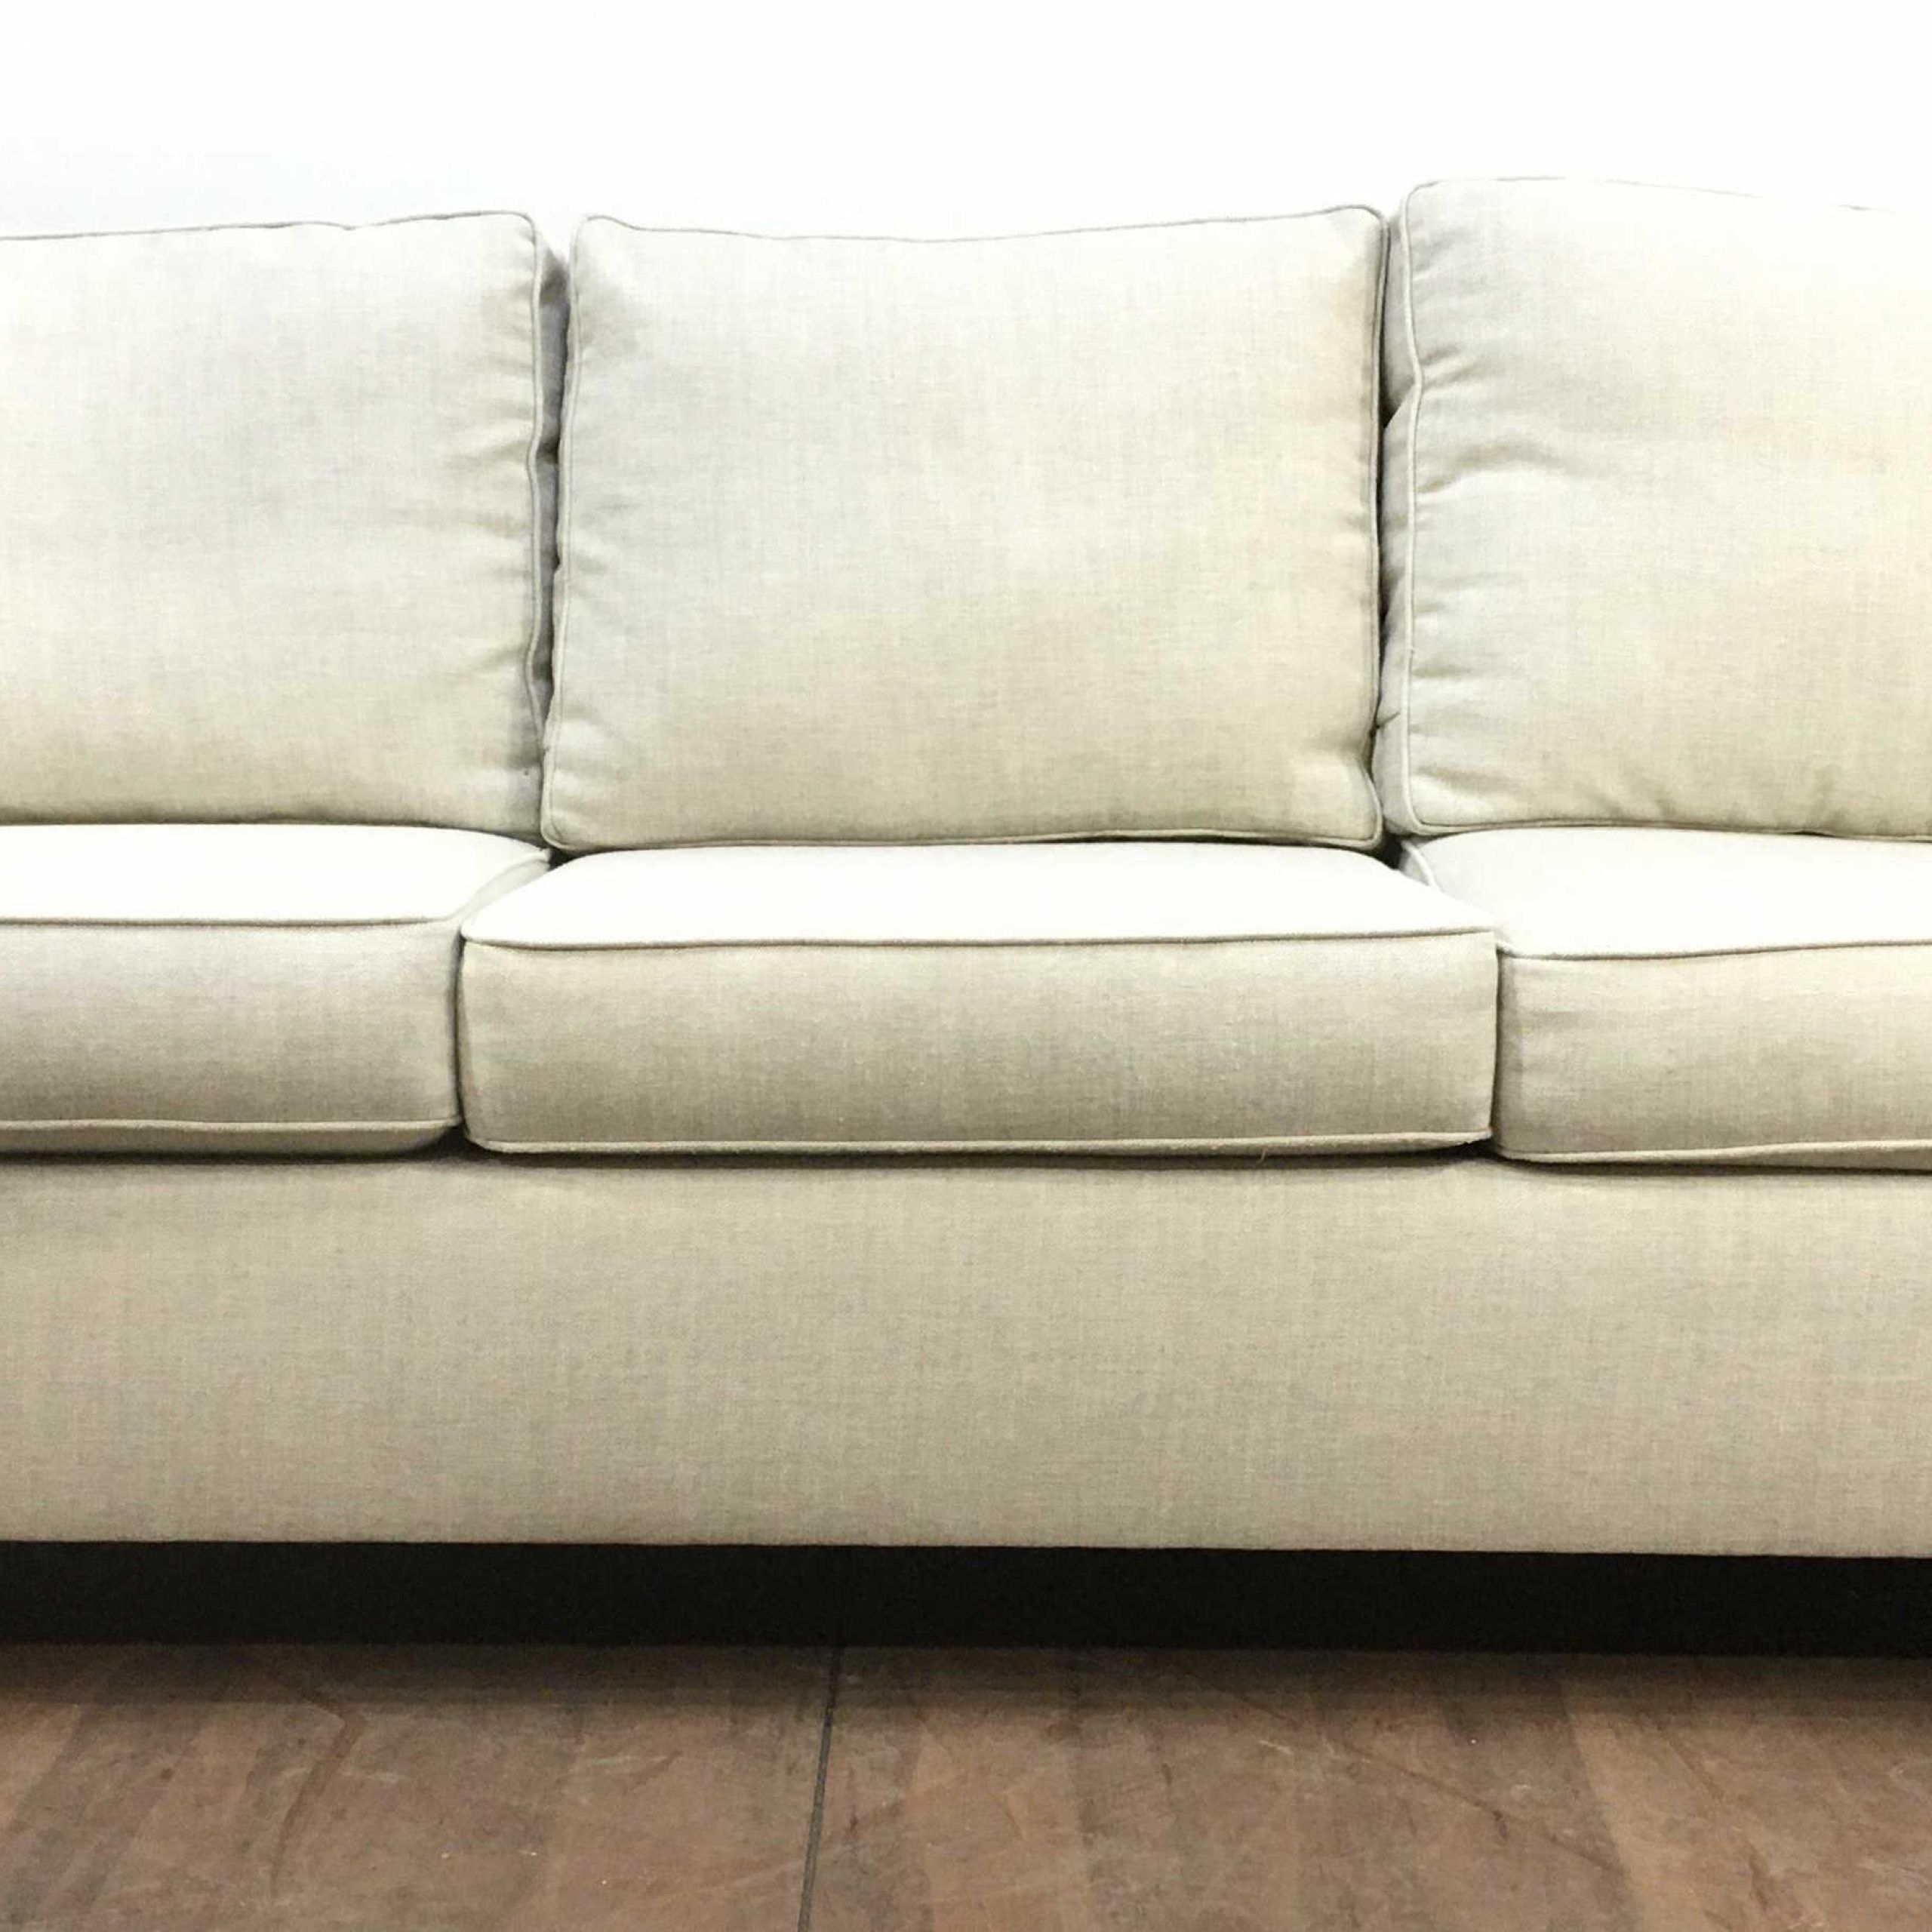 Lot – Pottery Barn Transitional Style Pillowback Sofa Throughout Sofas With Pillowback Wood Bases (Gallery 7 of 20)